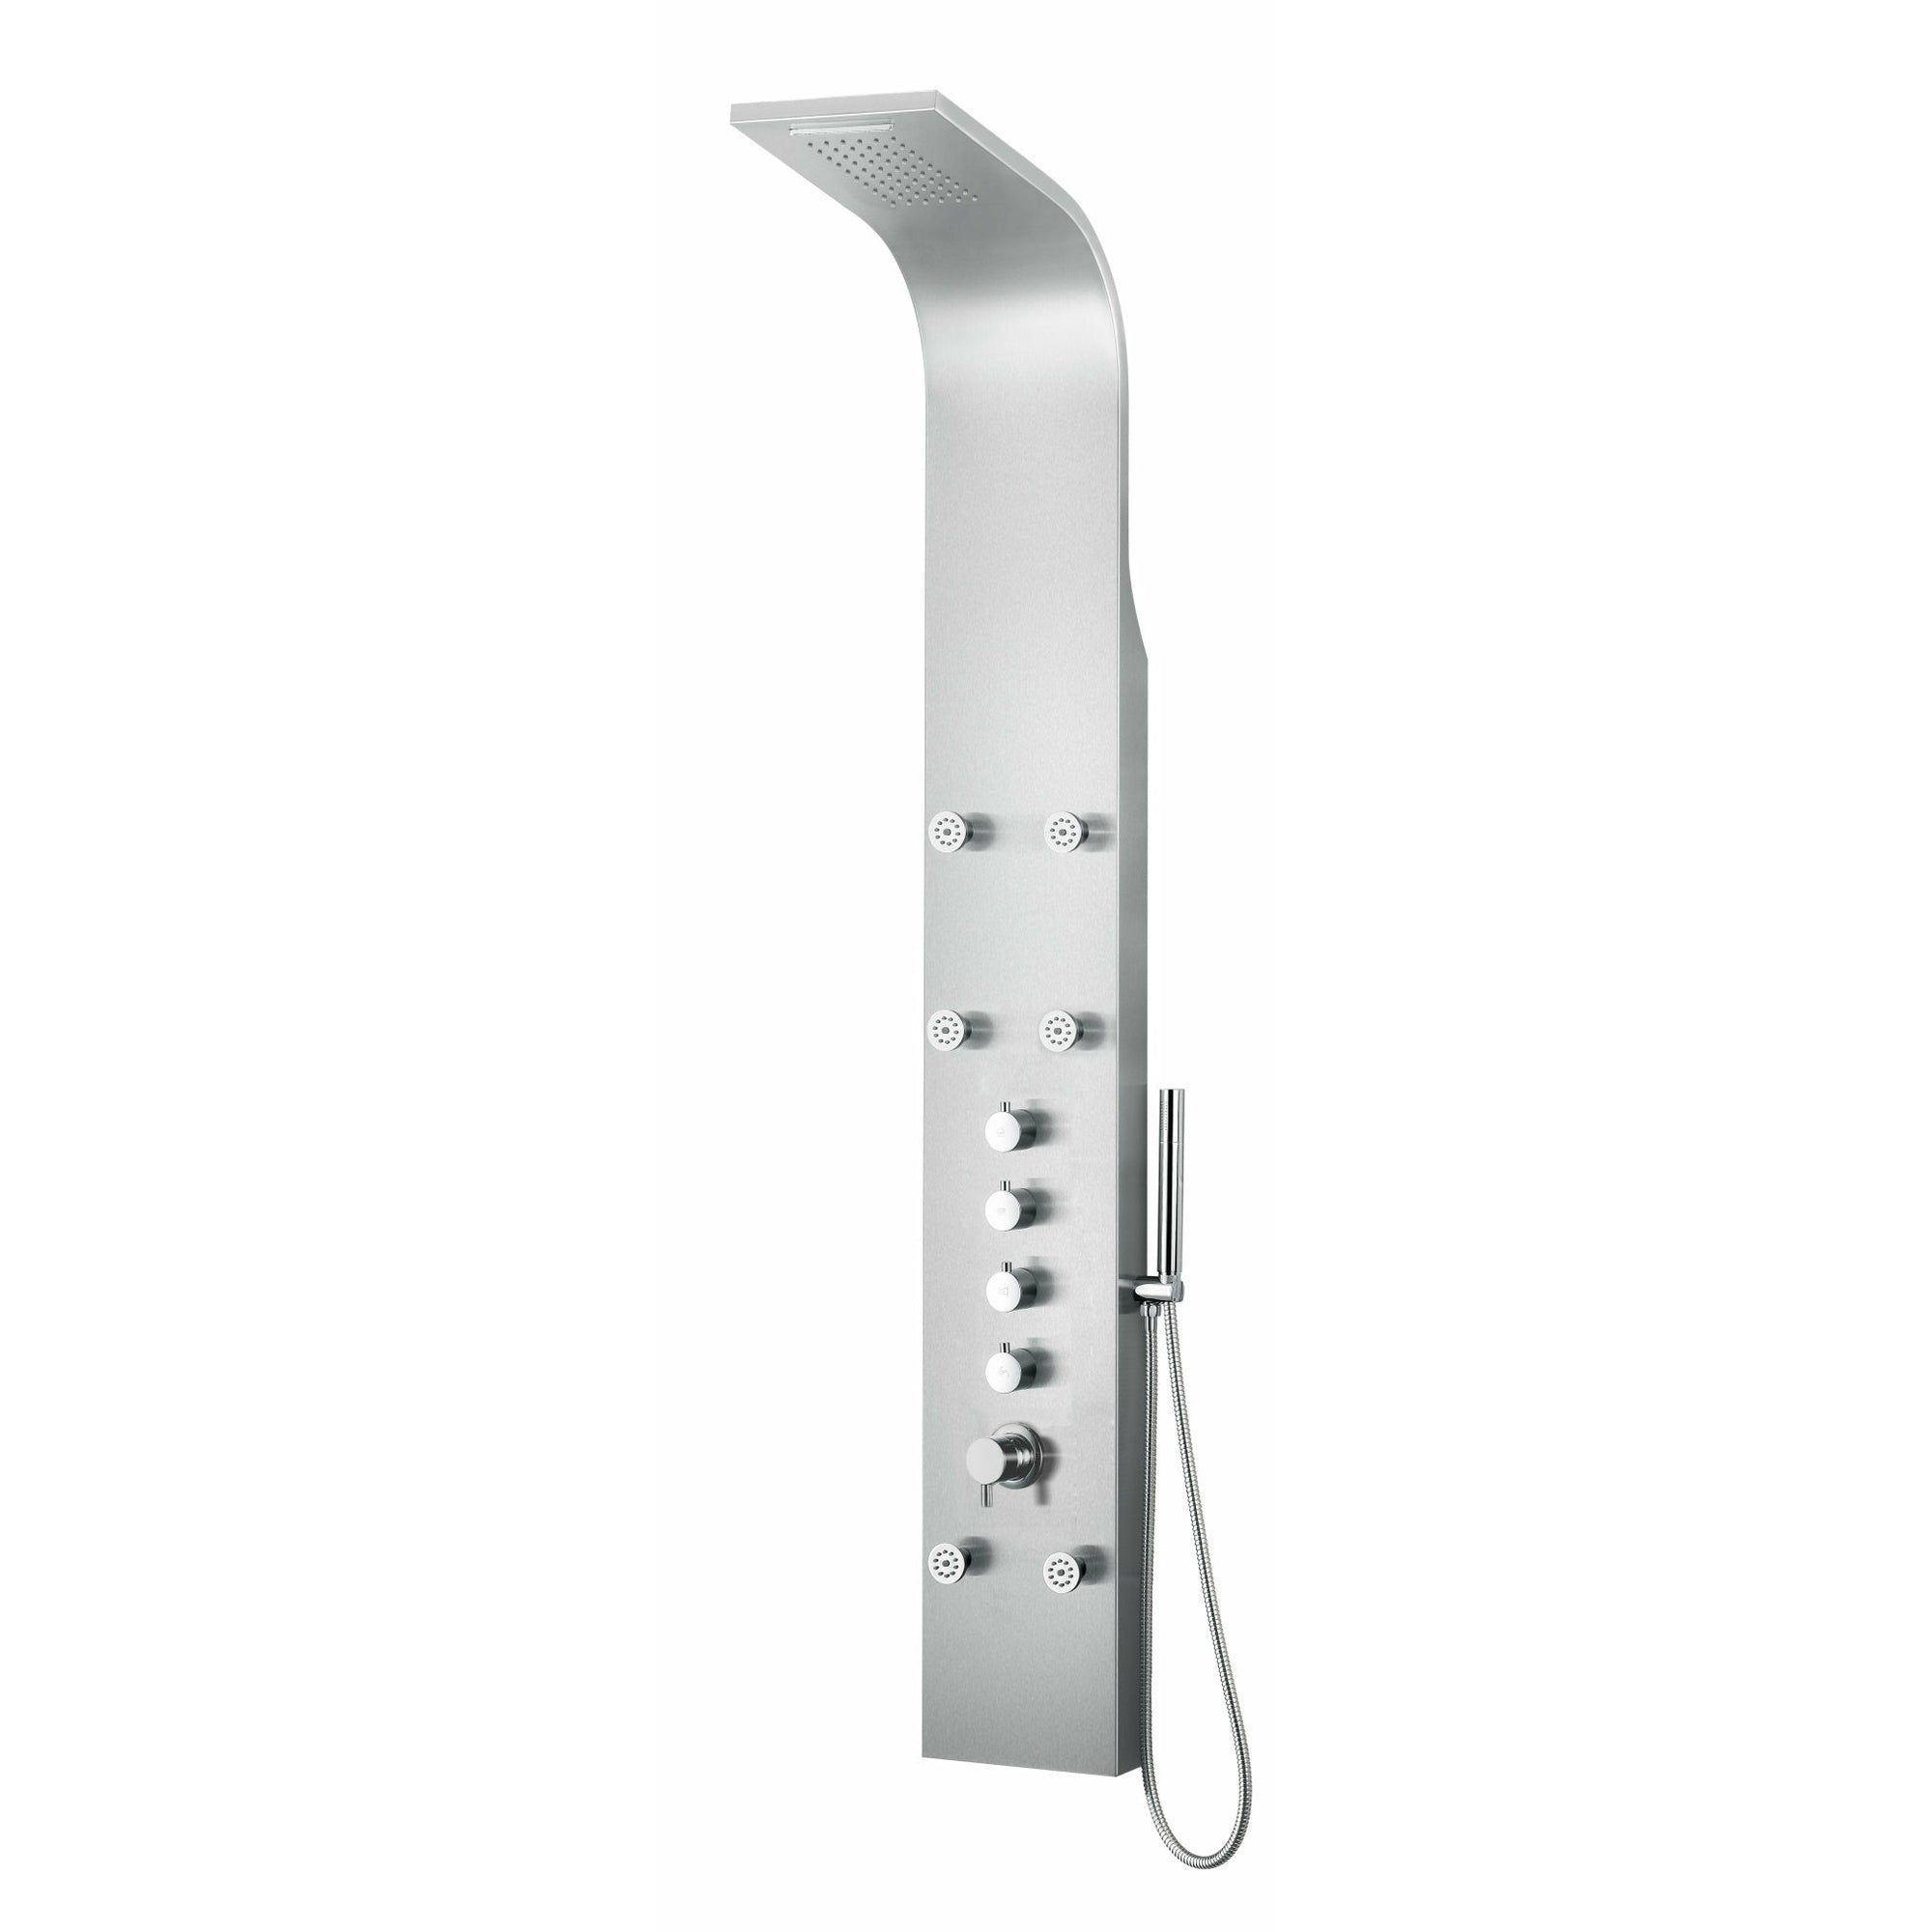 ALFI ABSP40 Stainless Steel Shower Panel with 6 Body Sprays, Overhead Rain Shower Head, Sleek Stainless Steel panel with Polished Chrome handles & knob, Flexible reinforced stainless steel hot & cold water supply hose, Handheld sprayer in a white background.